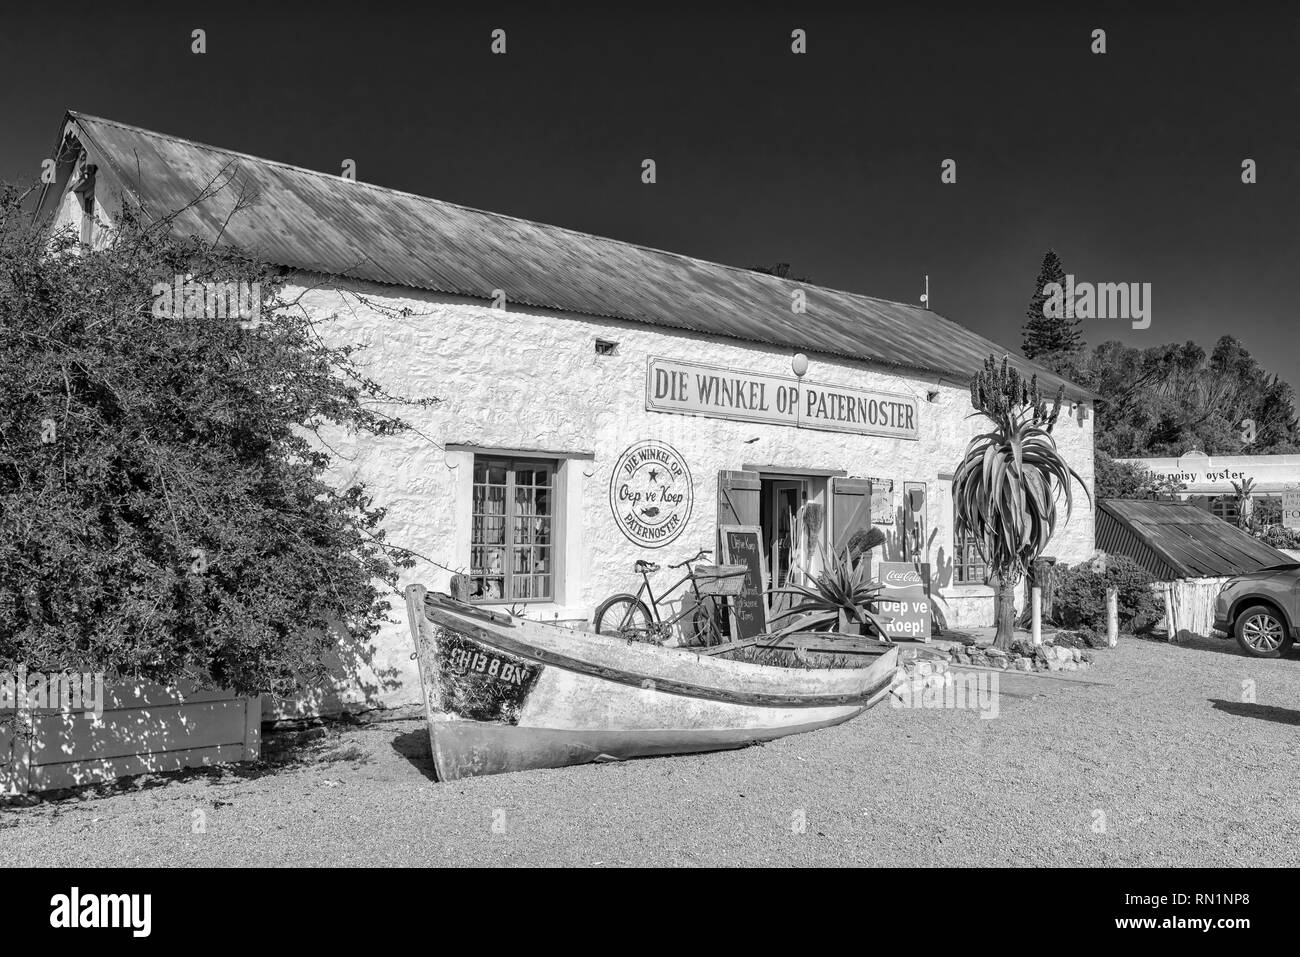 PATERNOSTER, SOUTH AFRICA, AUGUST 21, 2018: Die Winkel Op Paternoster, a shop in an historic building in Paternoster on the Atlantic Ocean Coast. A bo Stock Photo